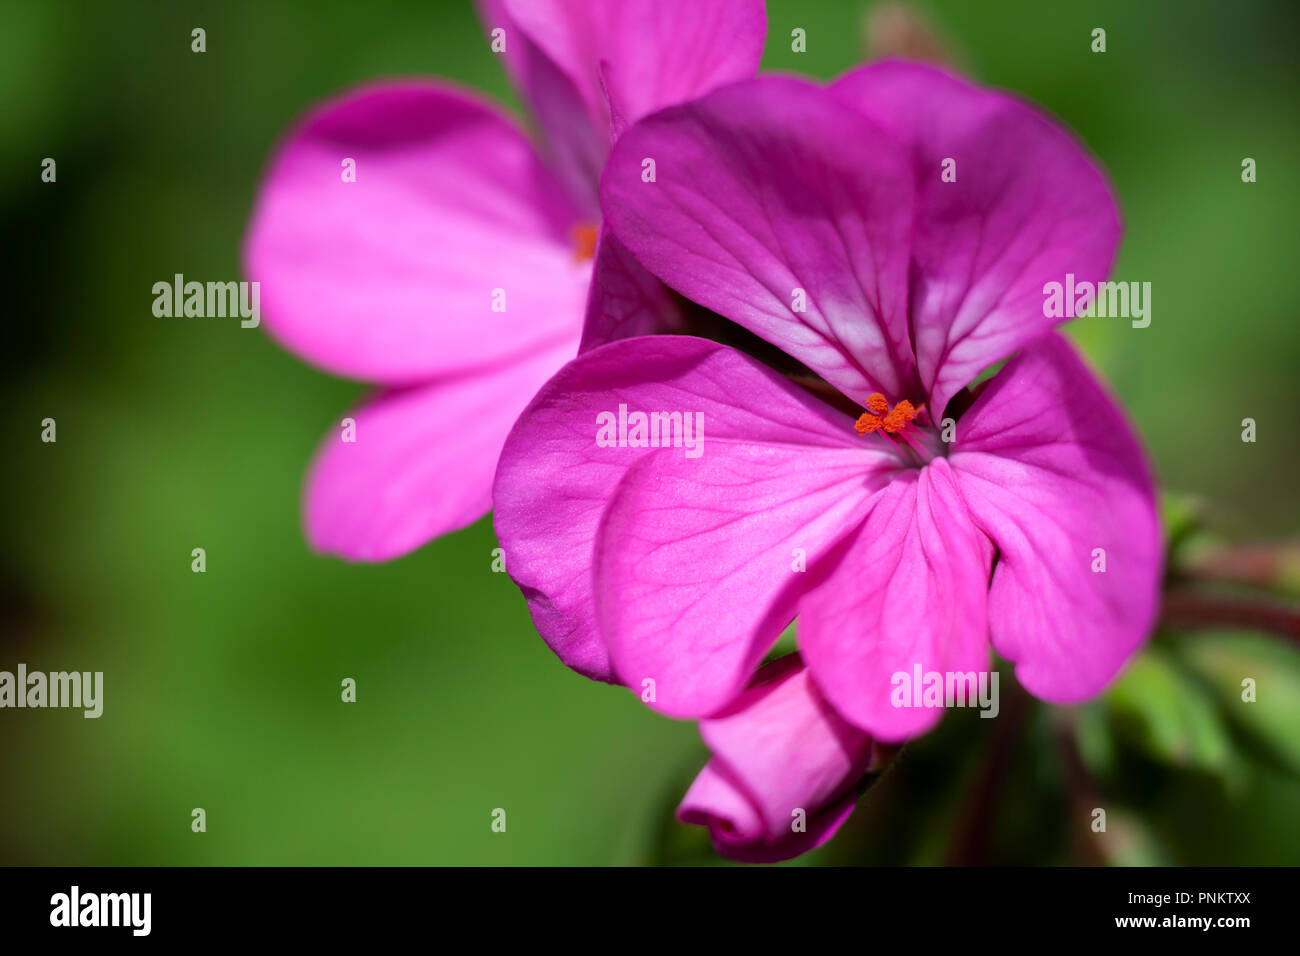 Close-up of a geranium floweragainst a background of green leaves Stock Photo